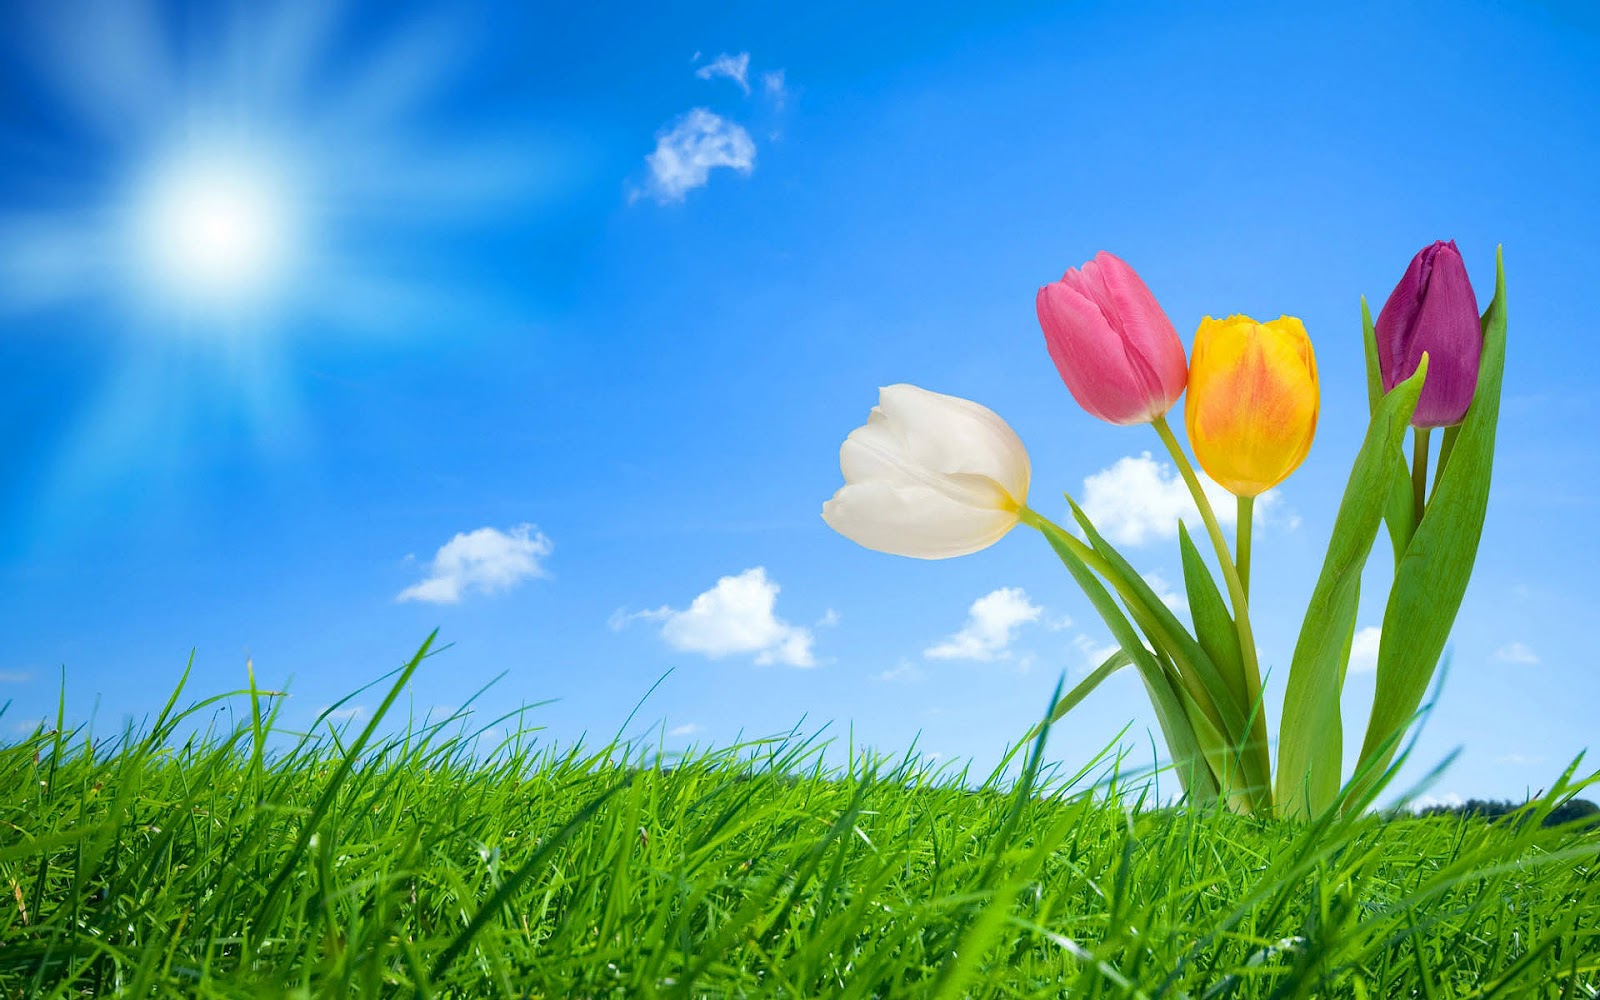   spring wallpapers hd spring wallpaper background picture 26jpg